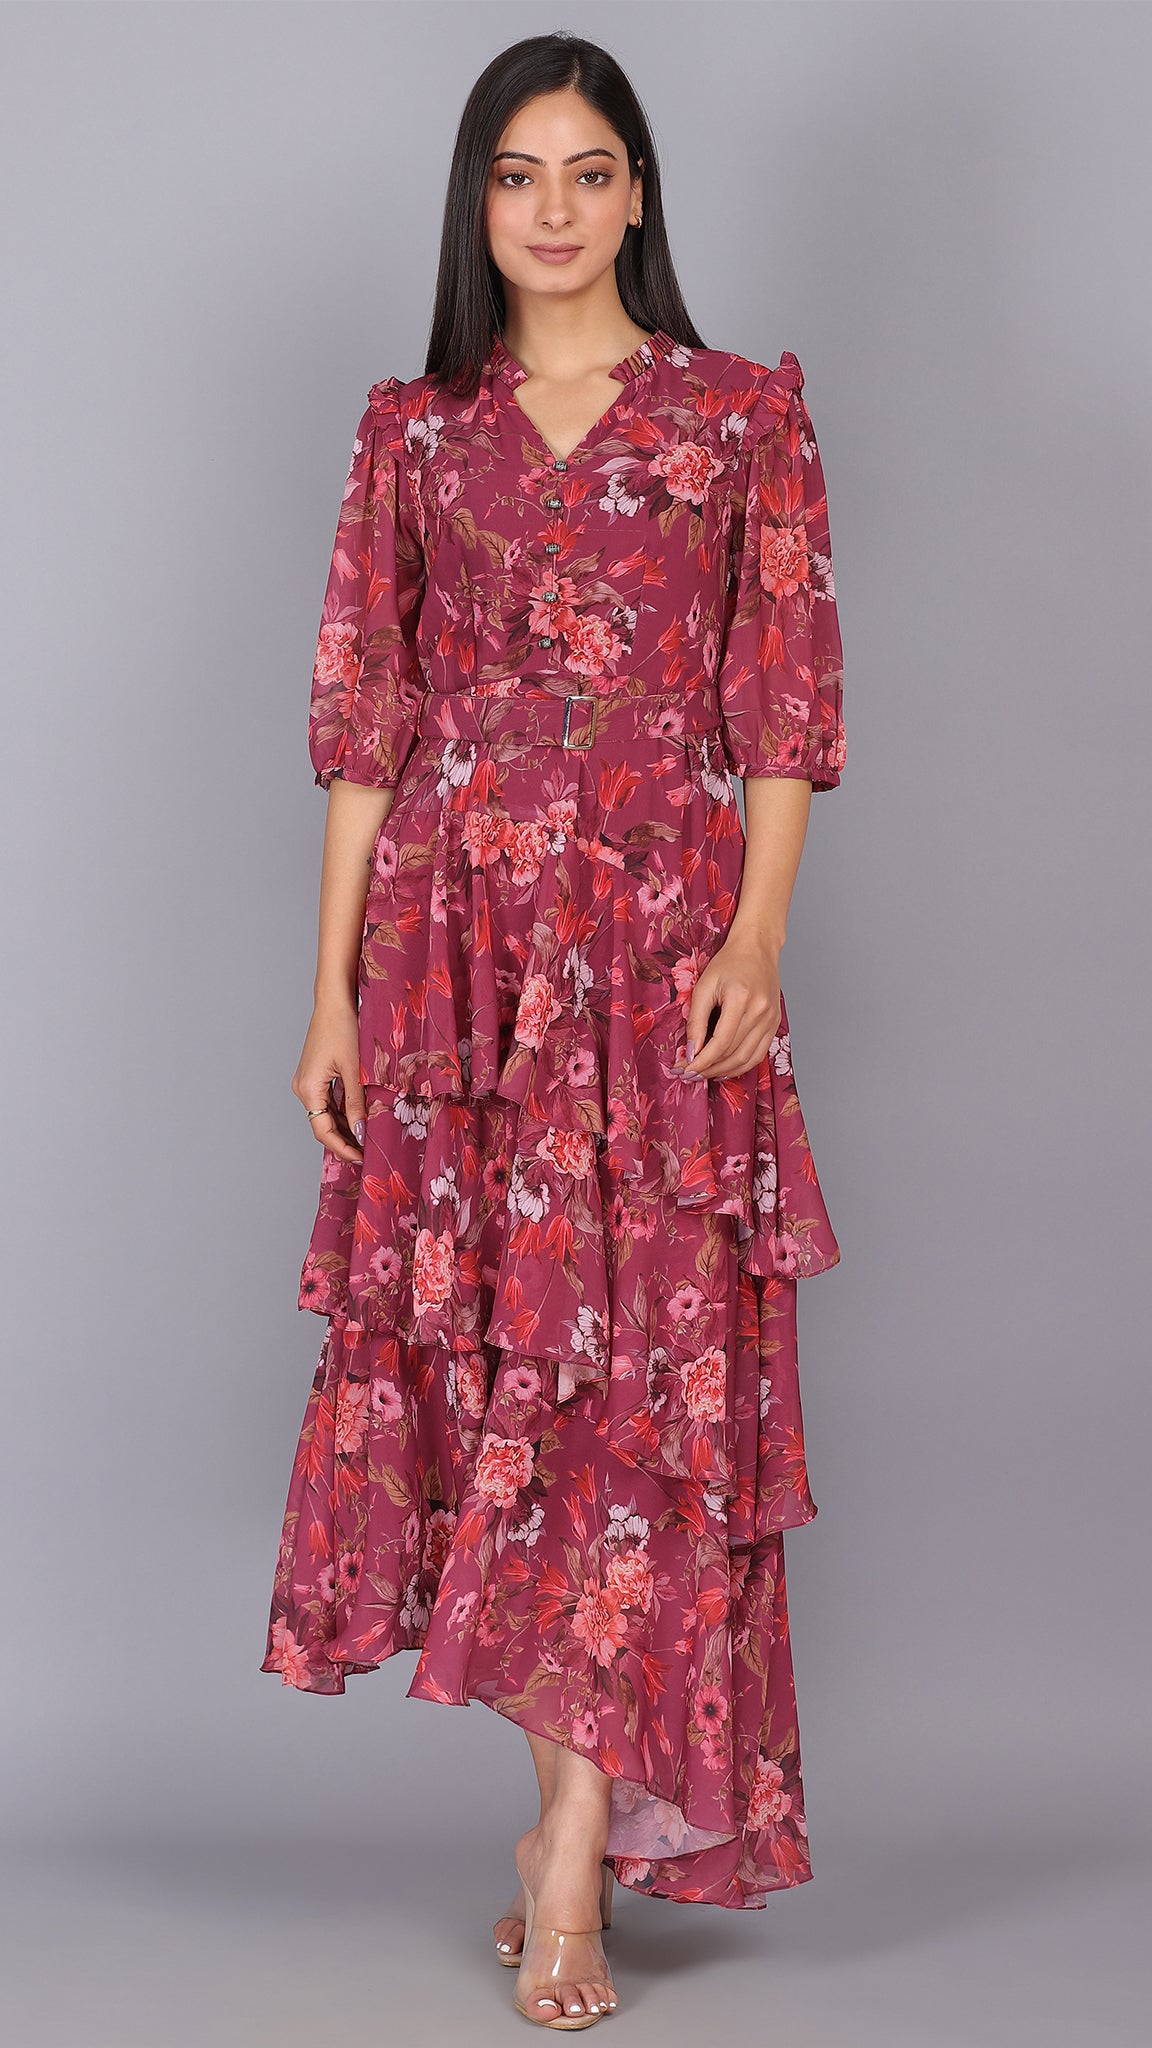 Wine Floral 3 Layers Up Down Dress